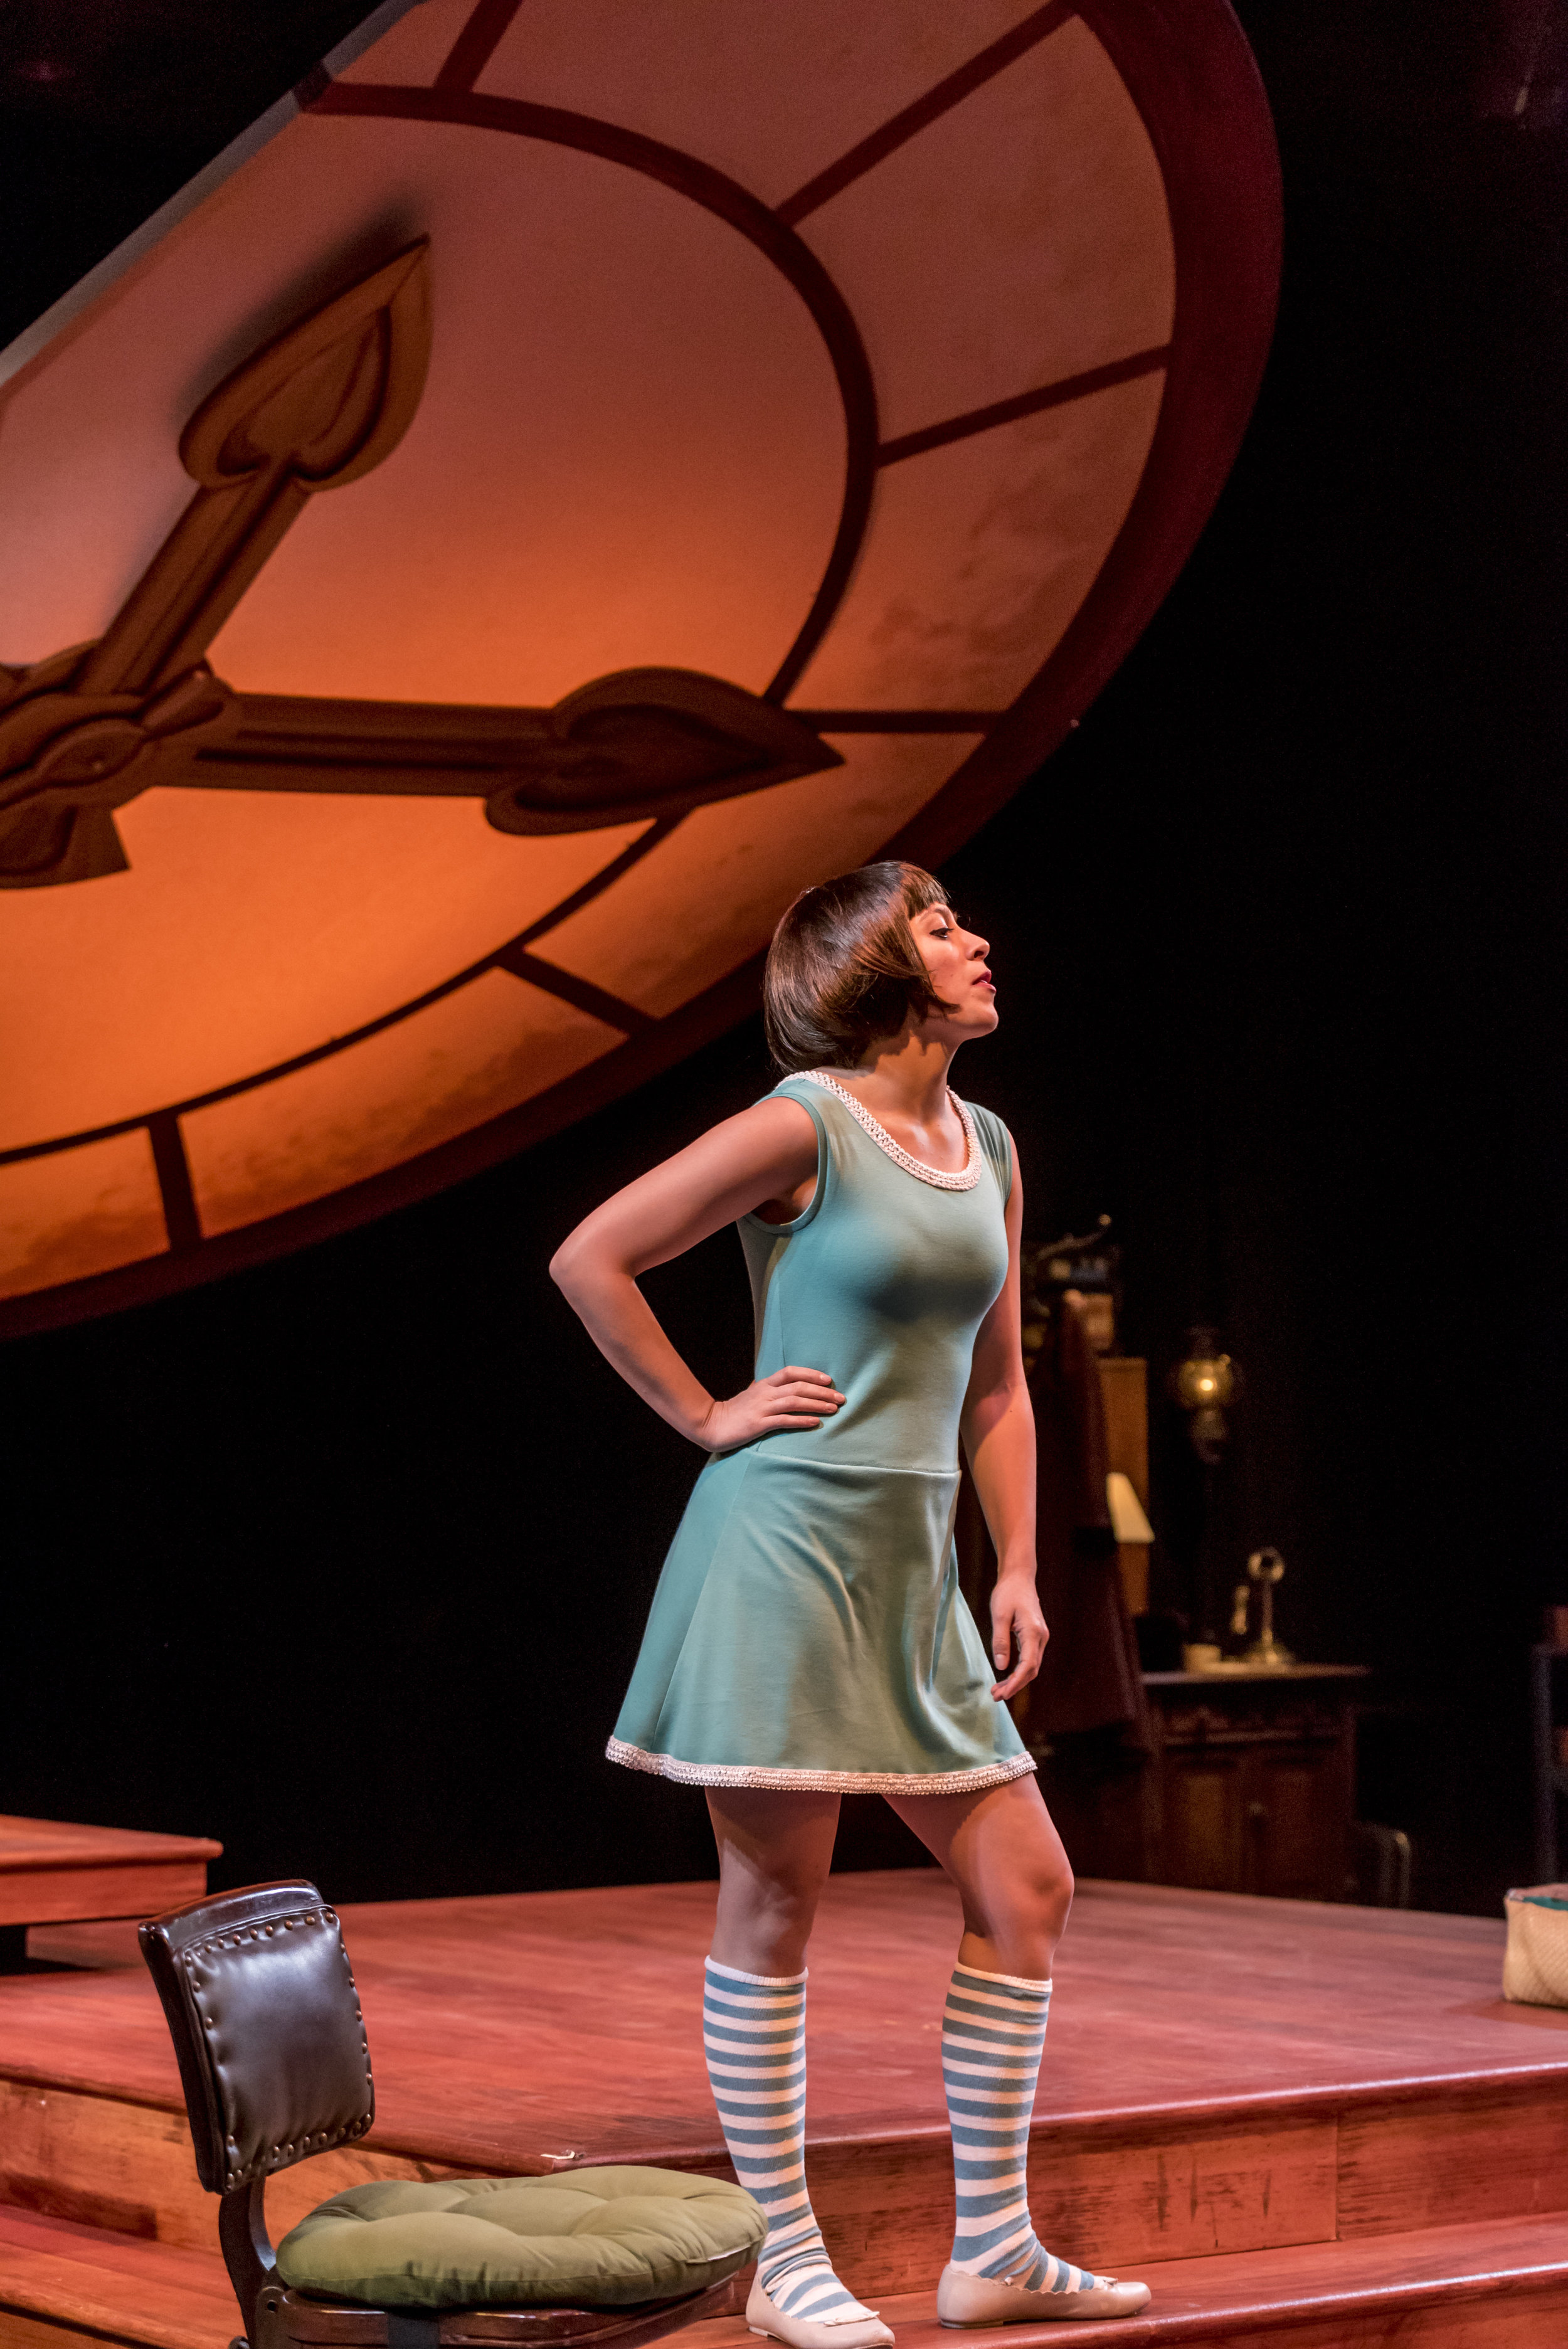  Full of sass as Jenny June Fail in  Failure: A Love Story  at Krannert Center for the Performing Arts. Written by Philip Dawkins. Directed by J.W. Morrissette.&nbsp;Music supervision by Justin M. Brauer.&nbsp;Scenic design by Evan Park (look at that